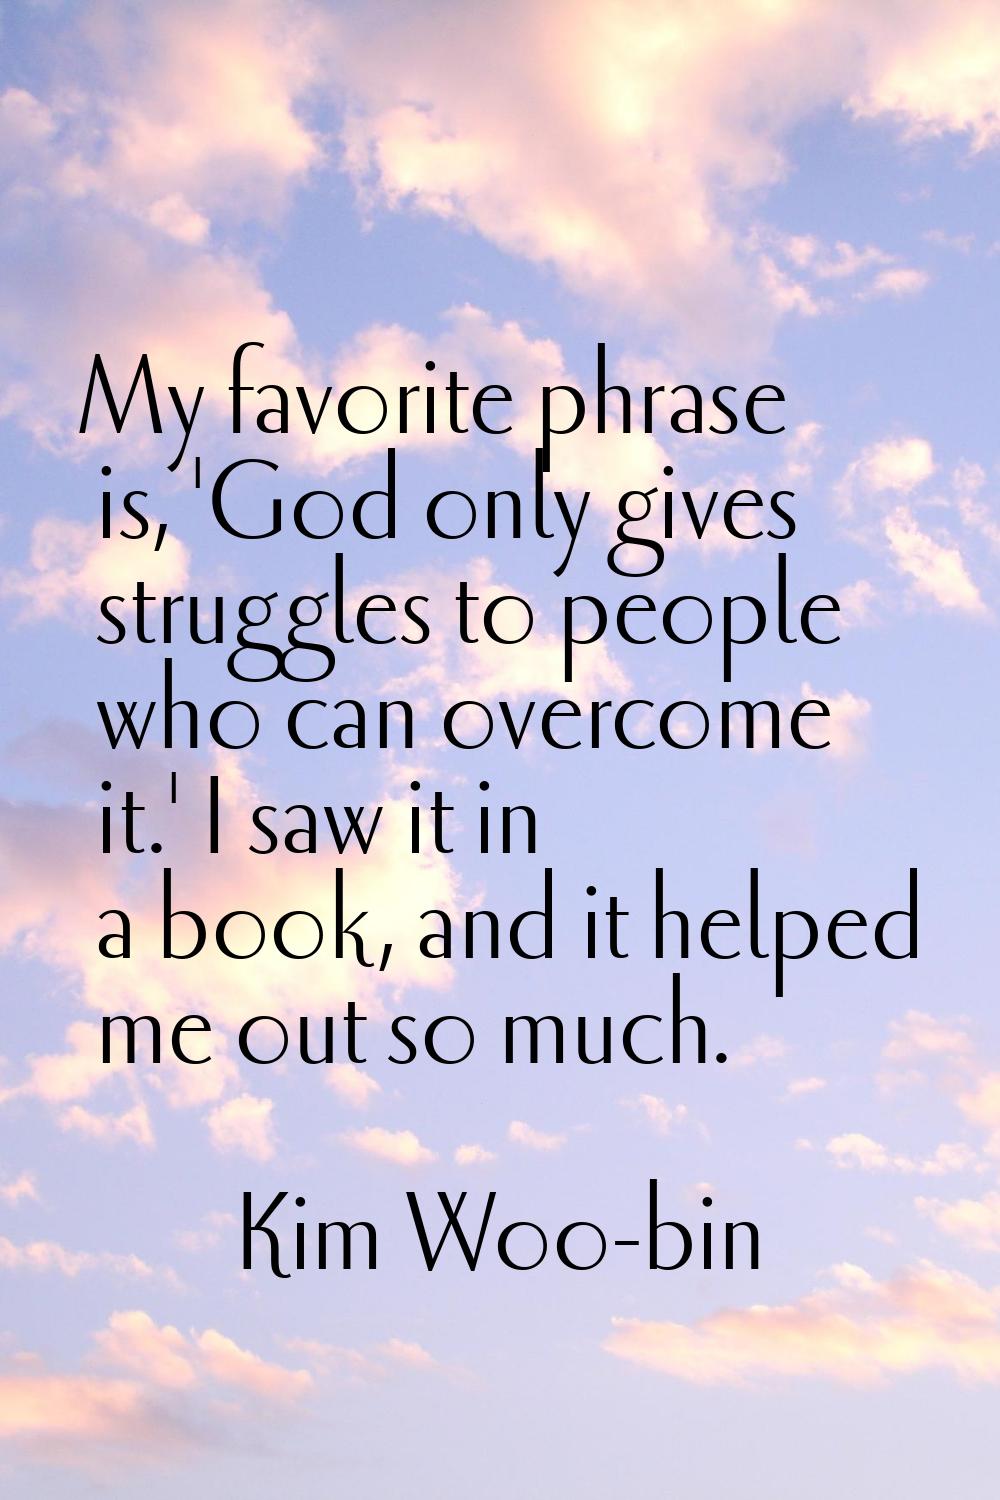 My favorite phrase is, 'God only gives struggles to people who can overcome it.' I saw it in a book